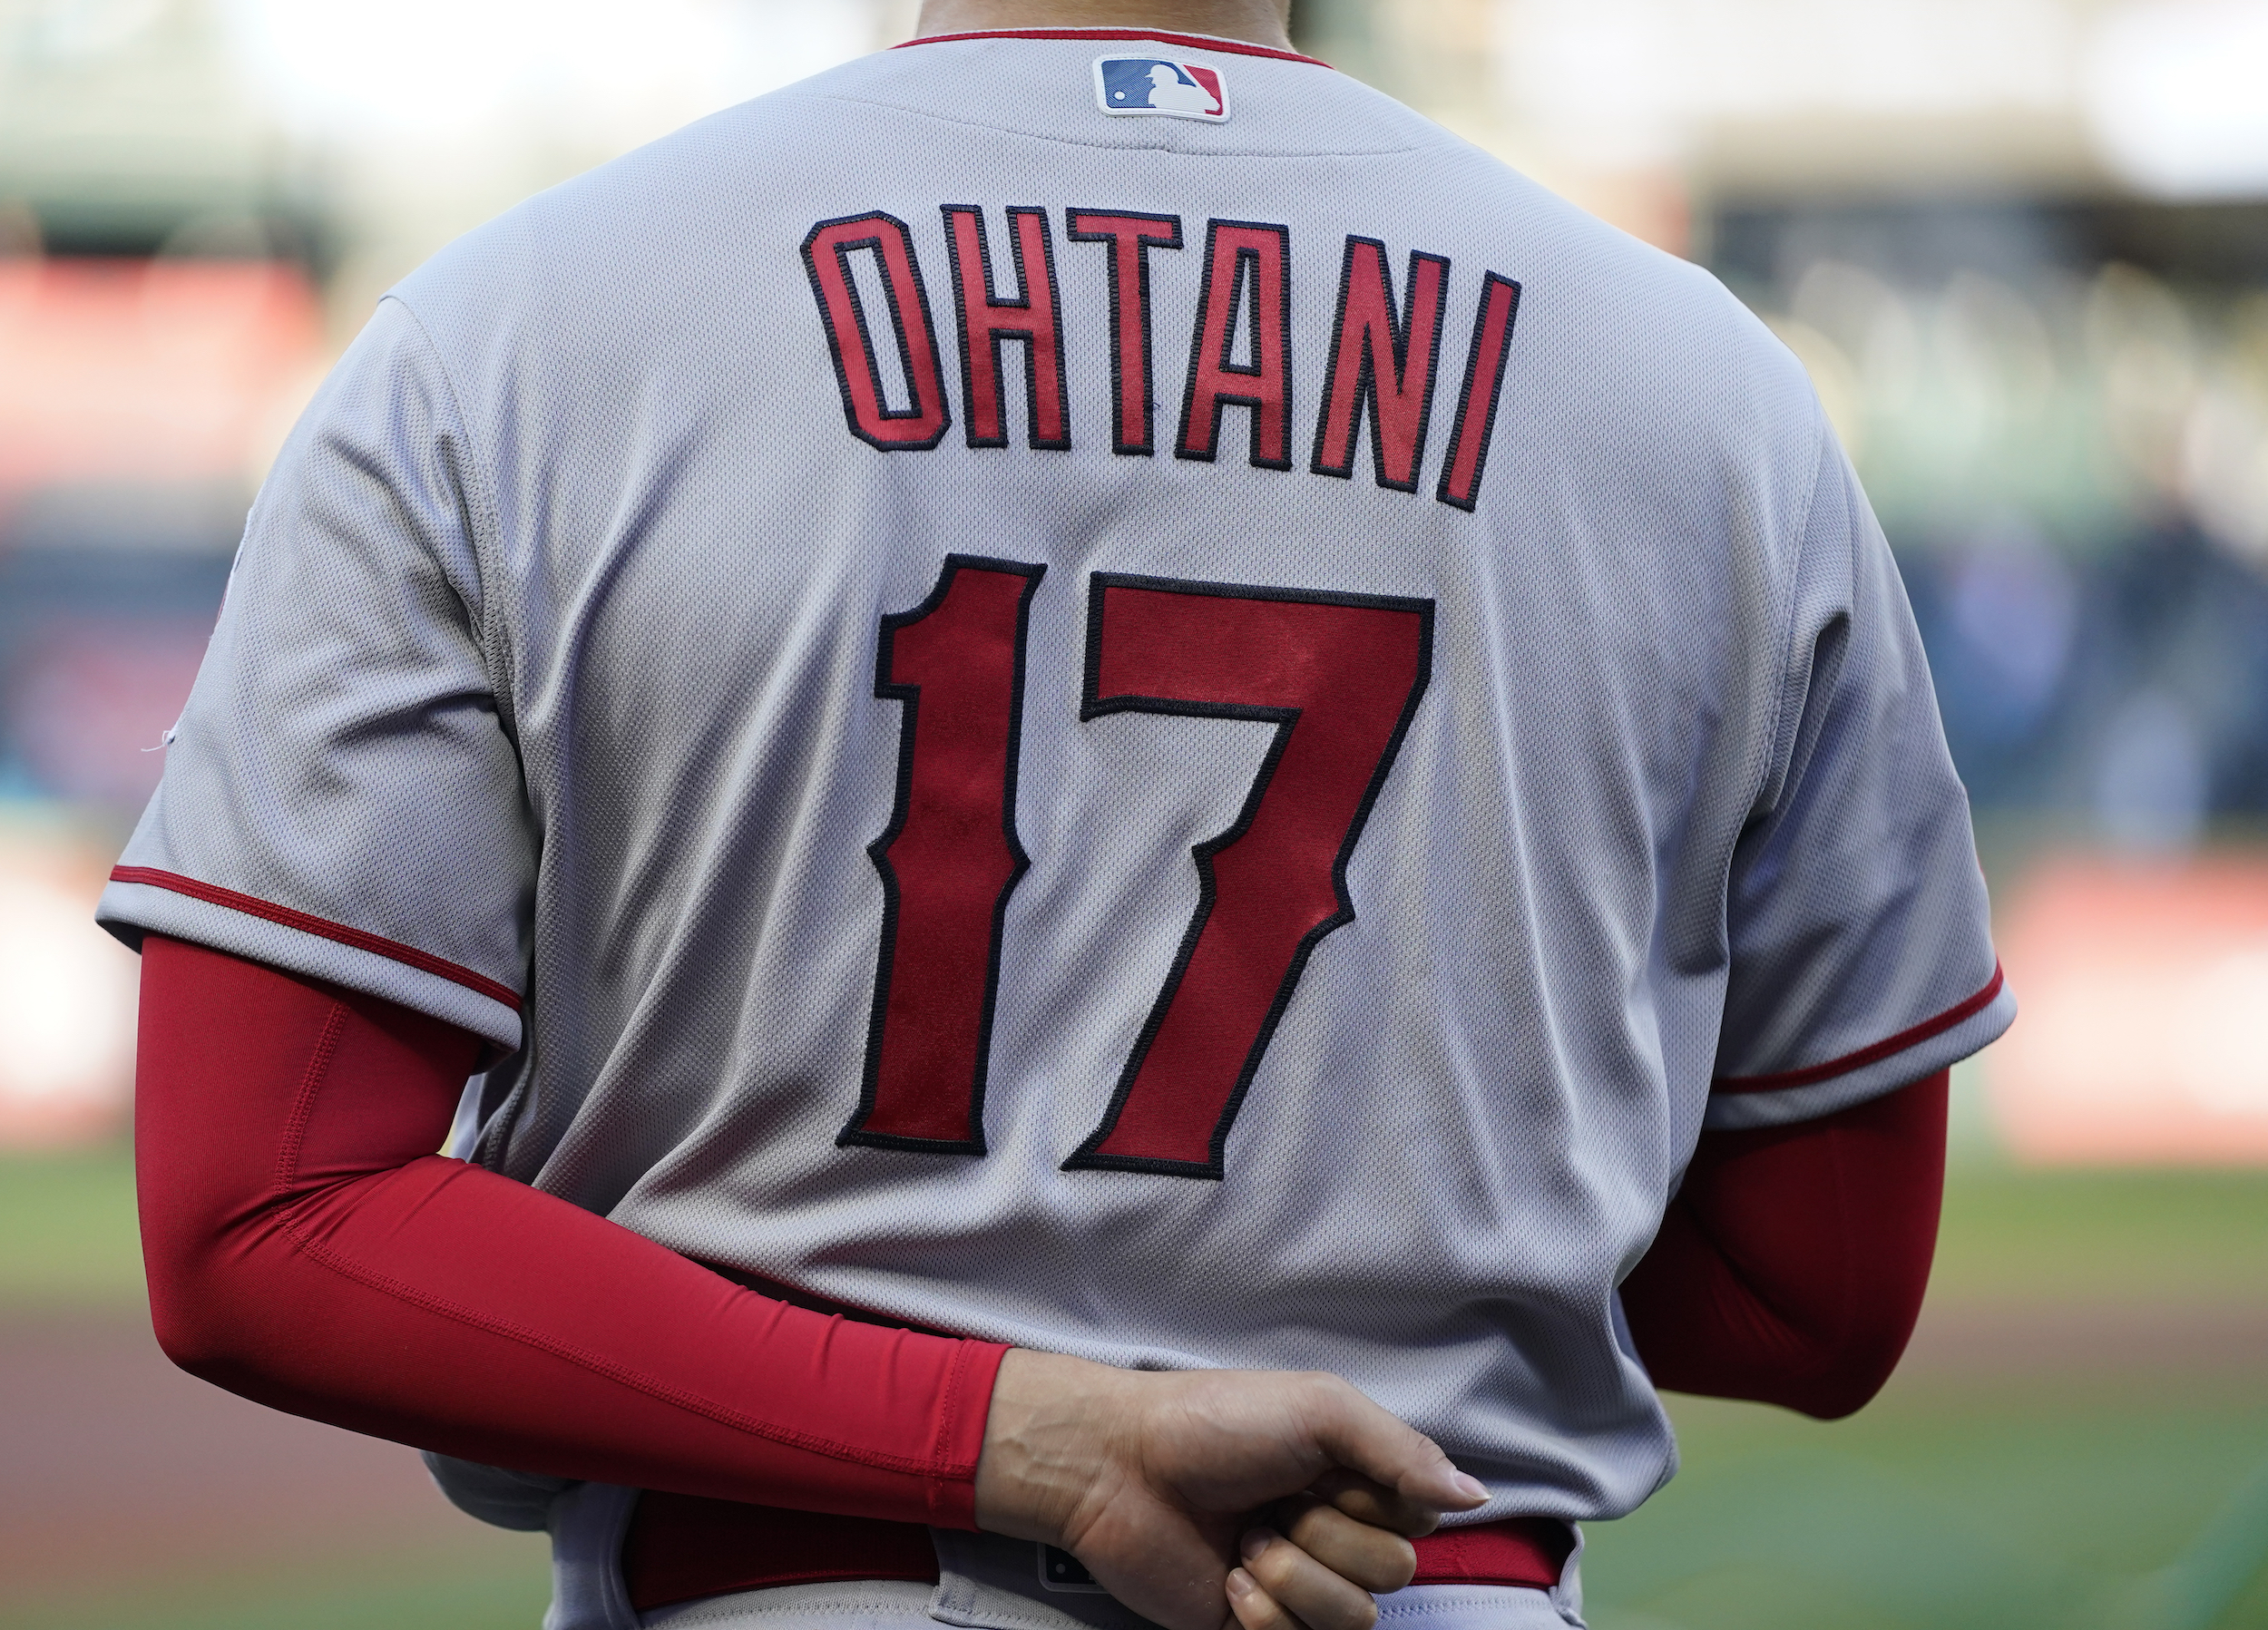 Which MLB Team Has the Best Shot at Landing Shohei Ohtani? - Chicago Cubs